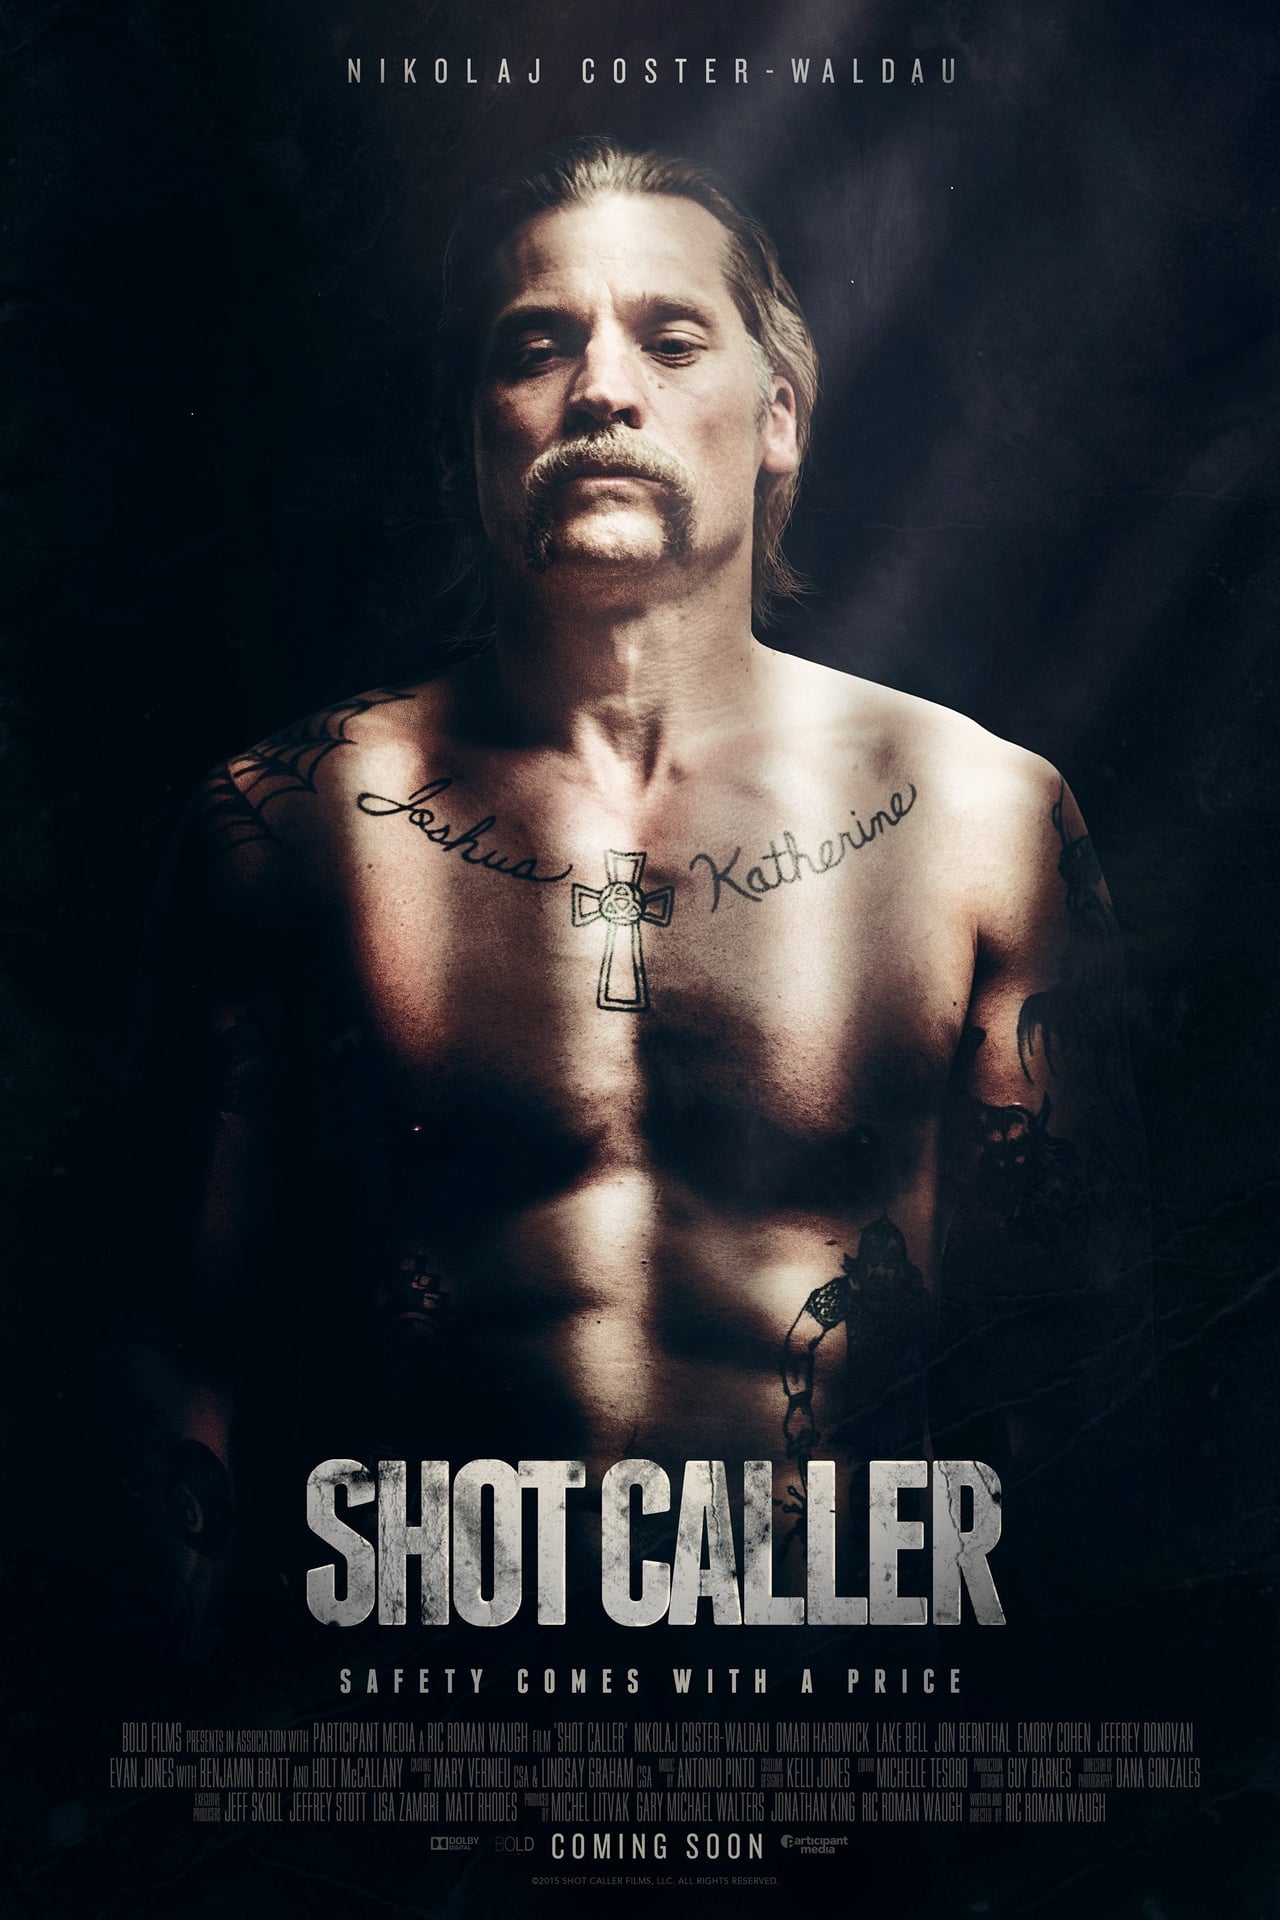 Watch Streaming Shot Caller 2017 Online Movie At Streaming